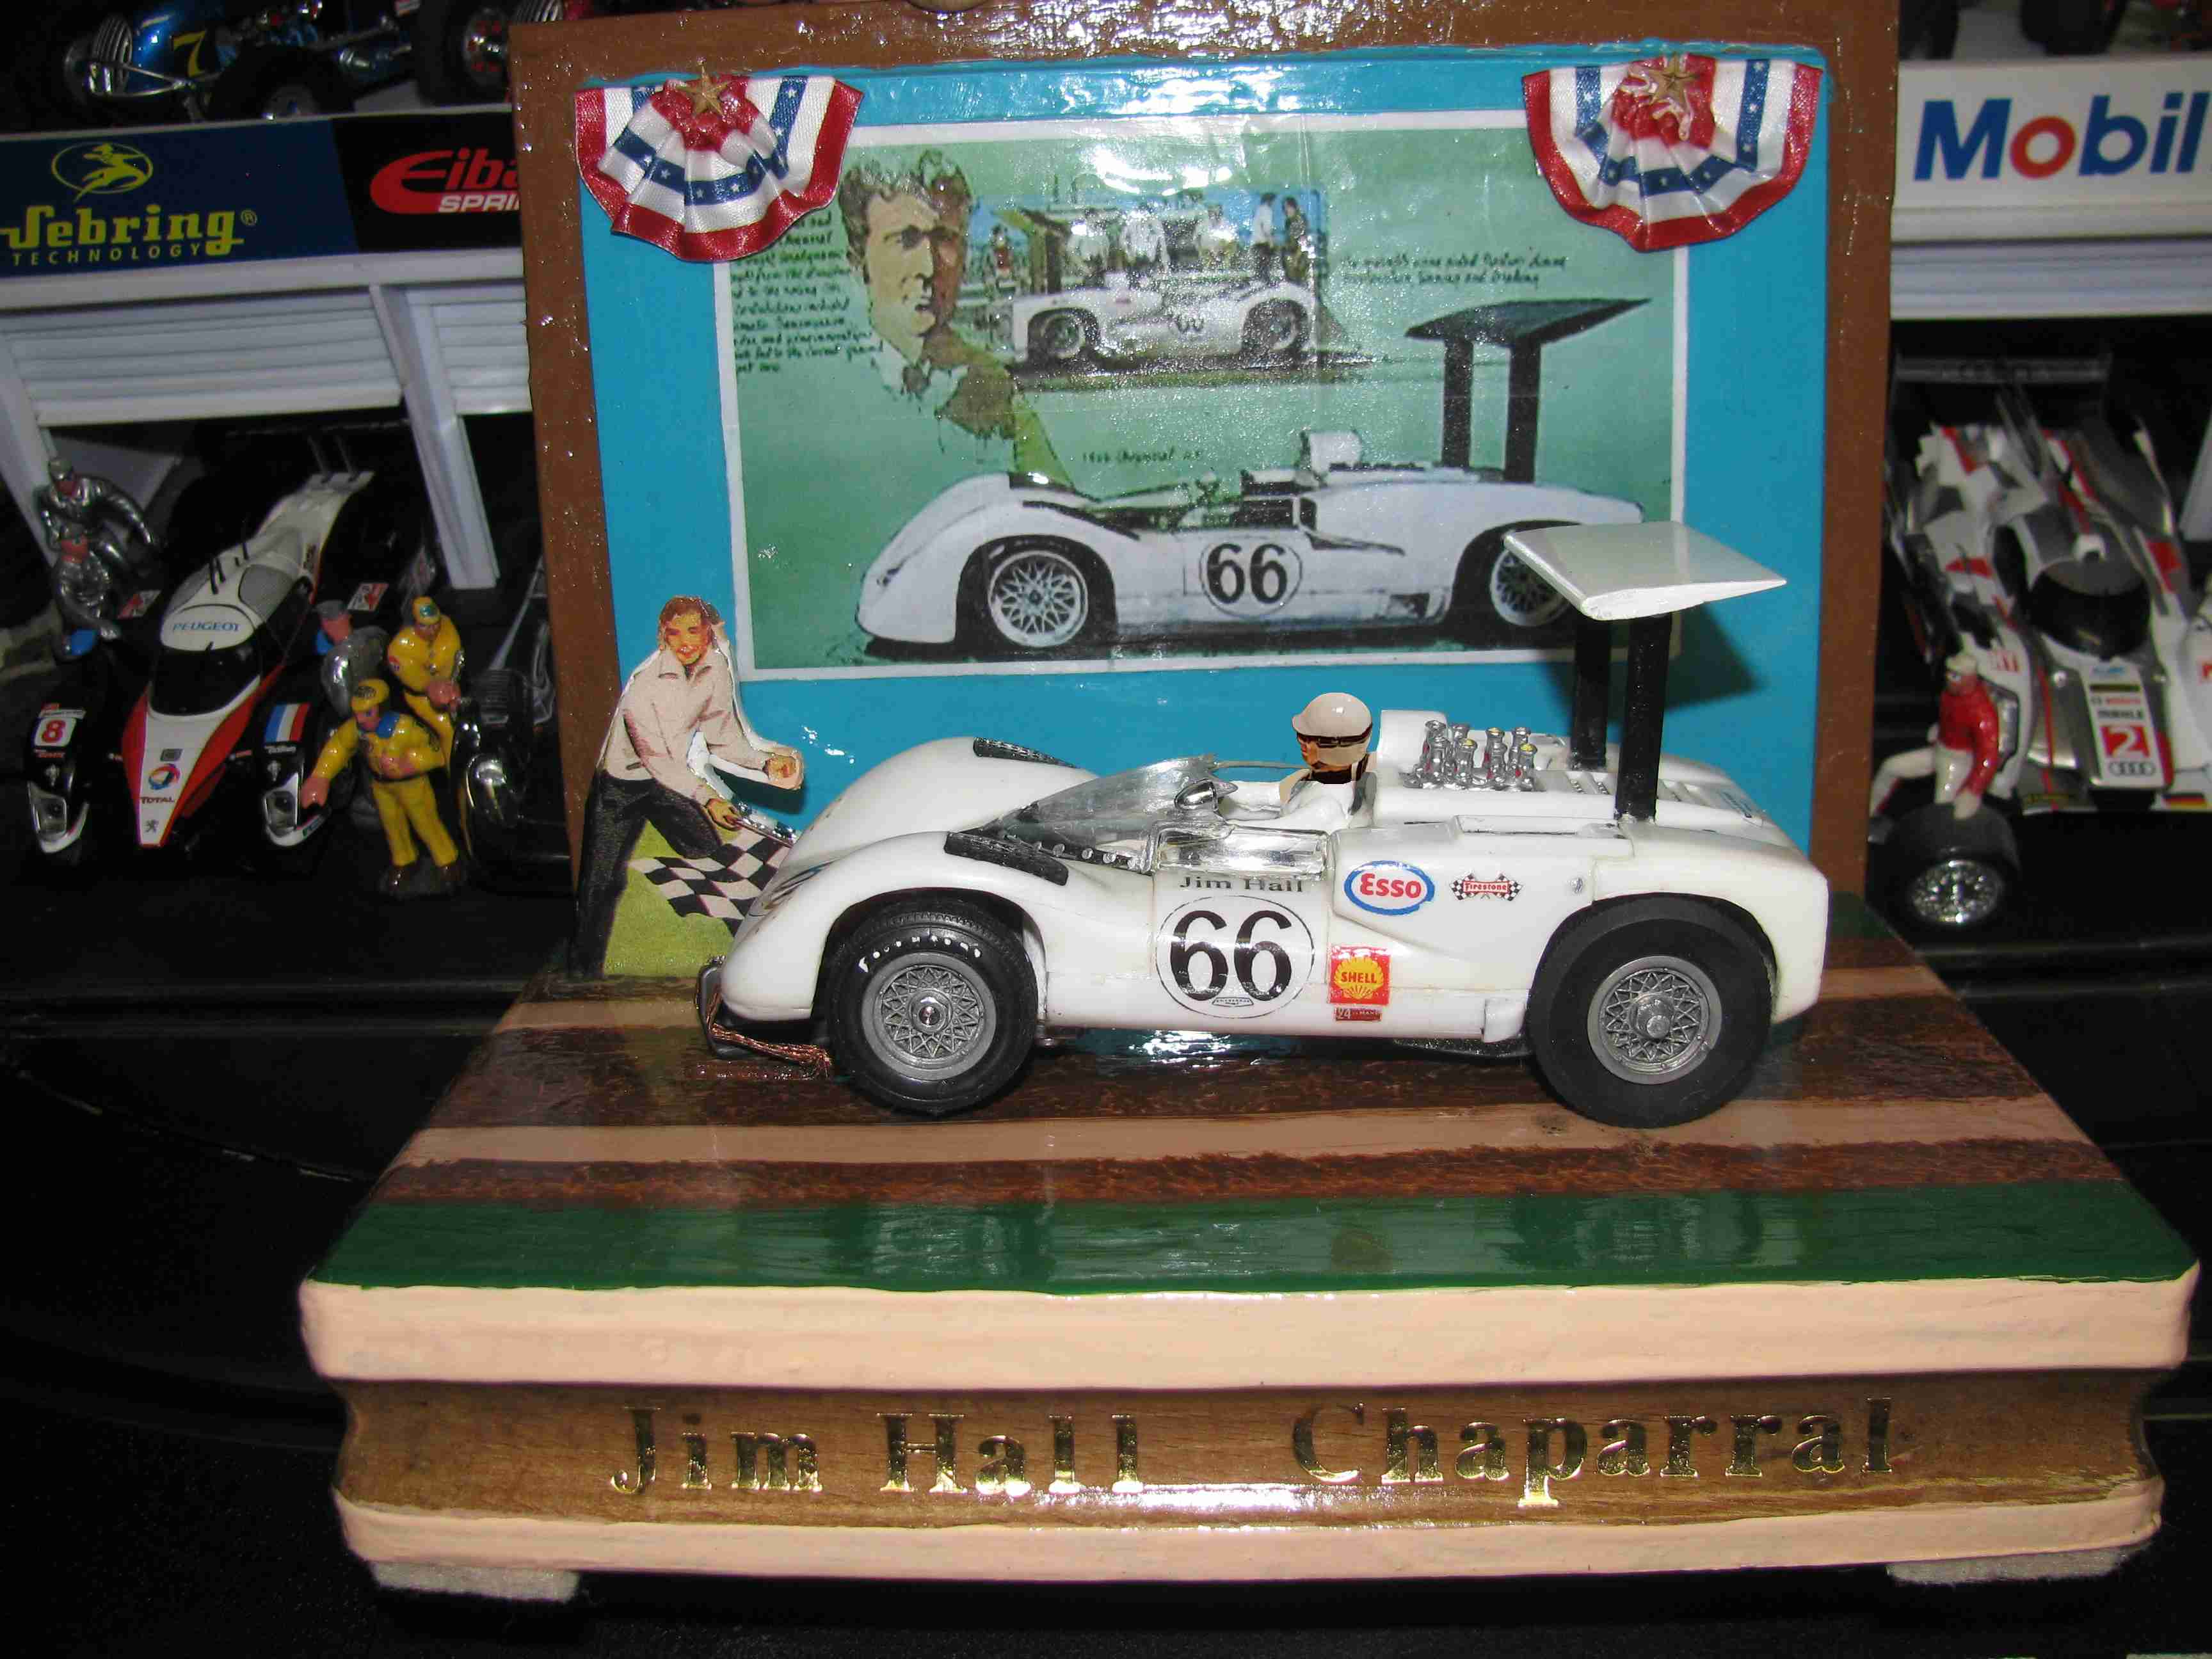 * SOLD * * SALE + Includes Real Wood Display * COX Chaparral 2E Jim Hall #66 1:24 Scale Slot Car + Real Wood Display *SALE* 